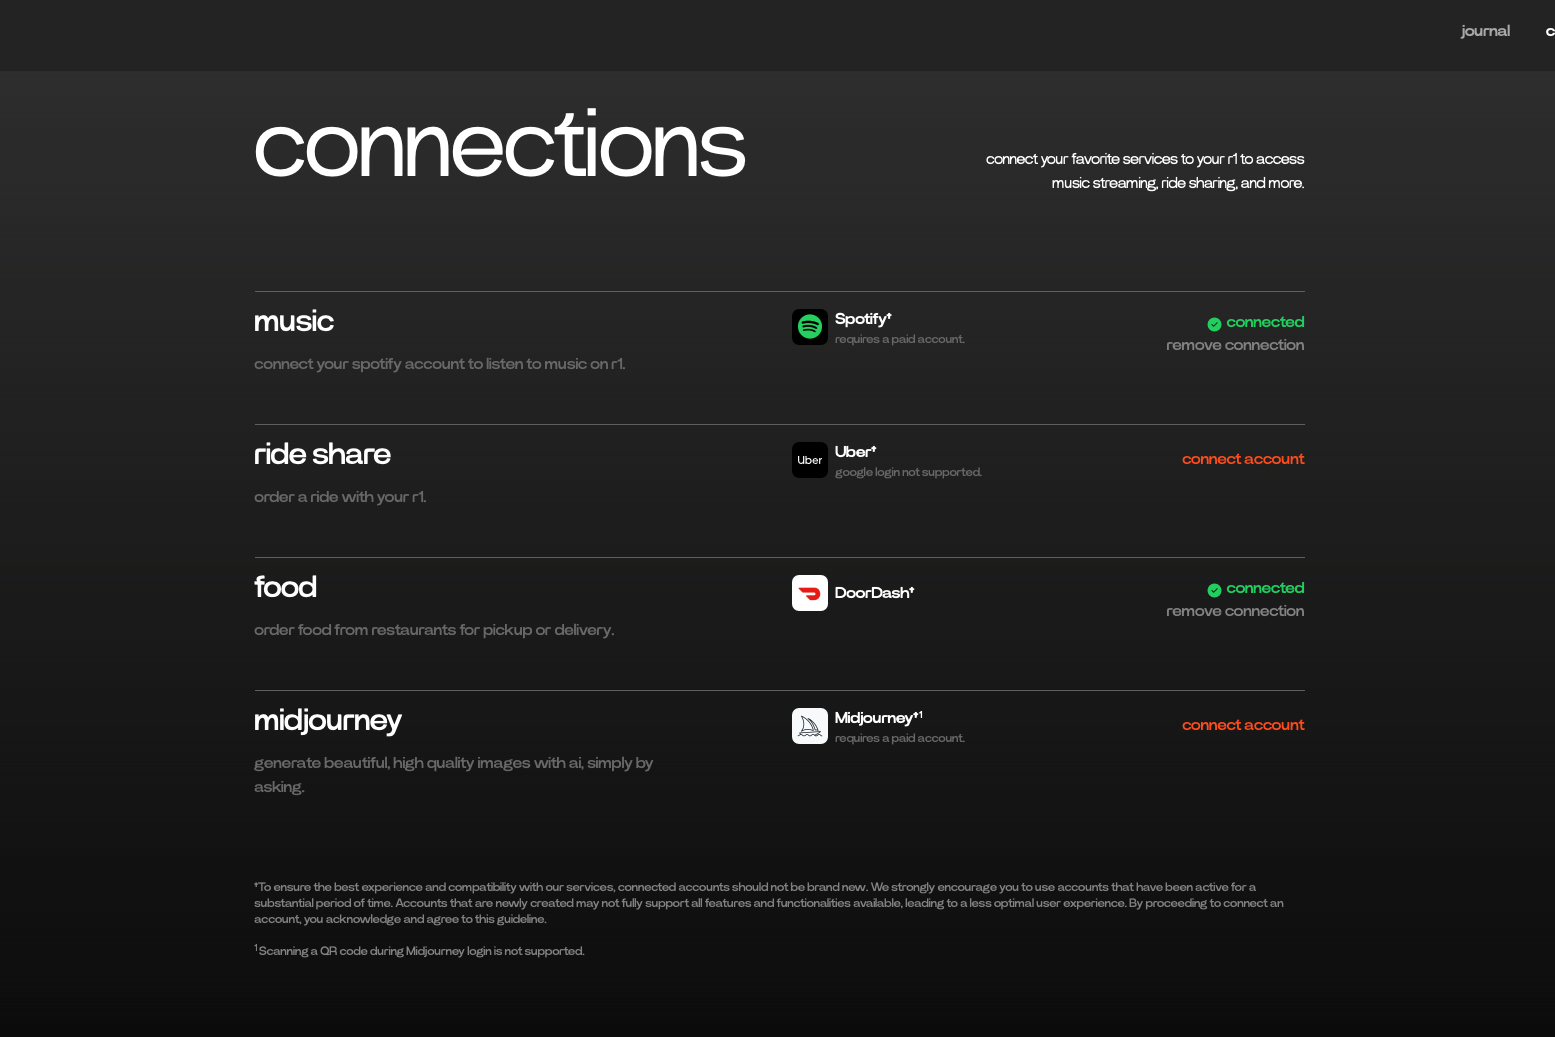 The Rabbit website for adding "Connections" to the R1.